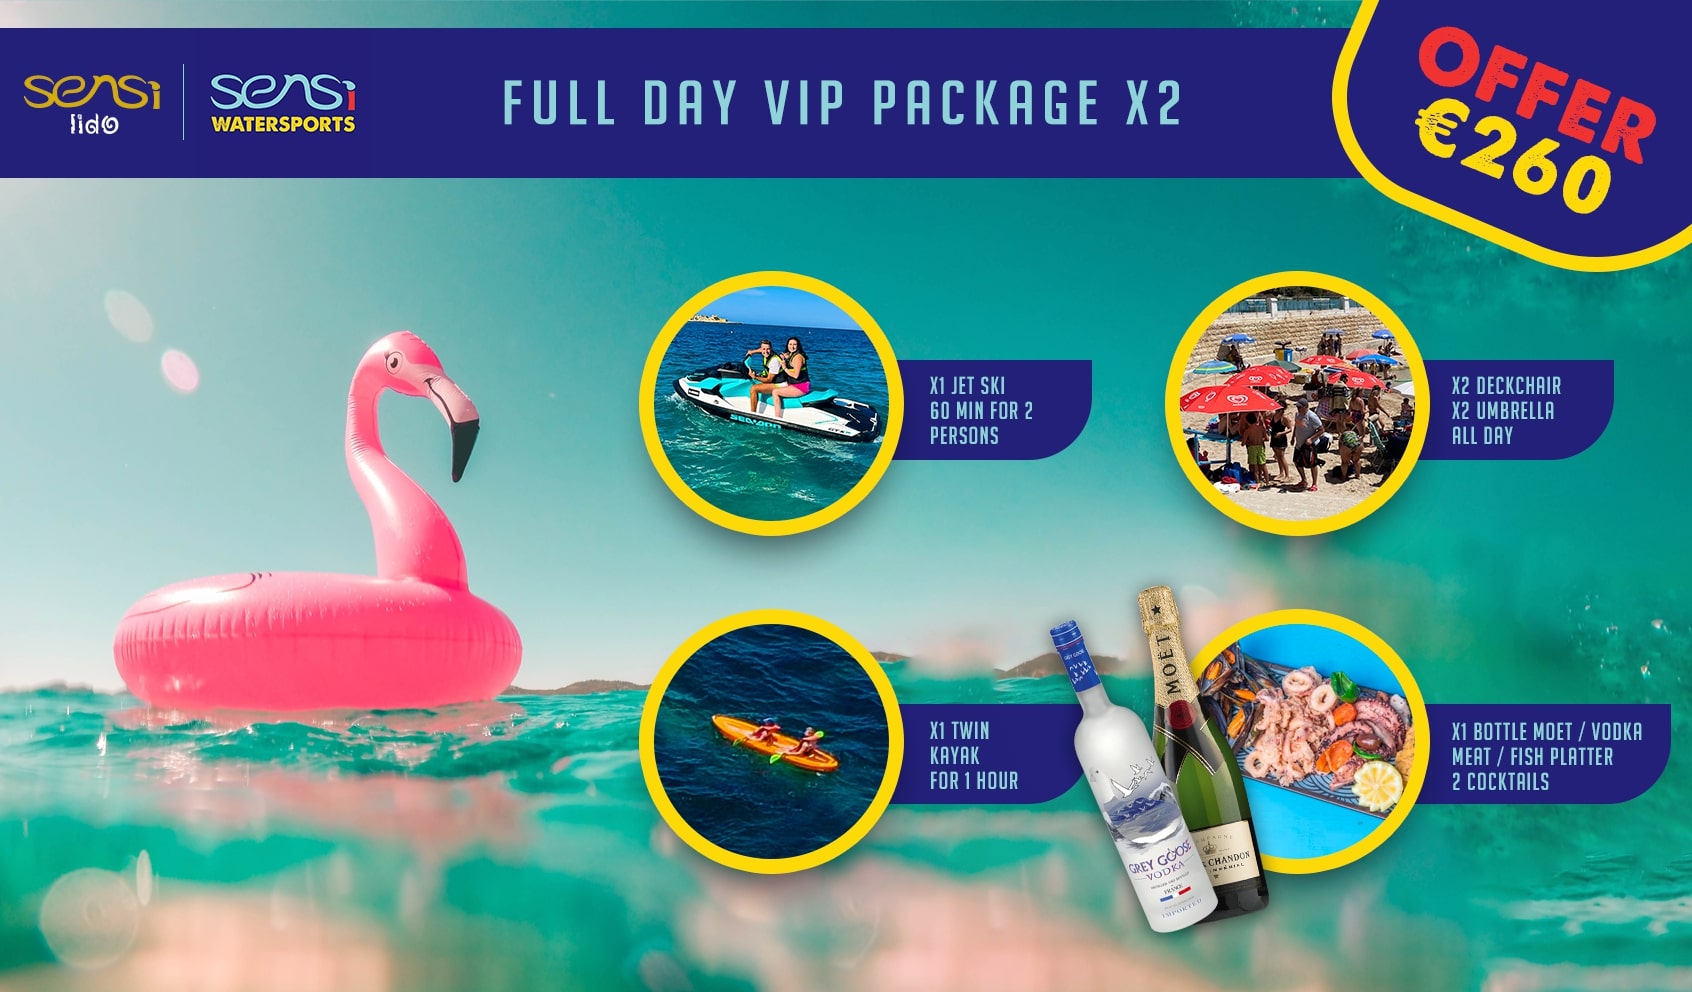 Full-Day-VIP-package-deal-x2-260